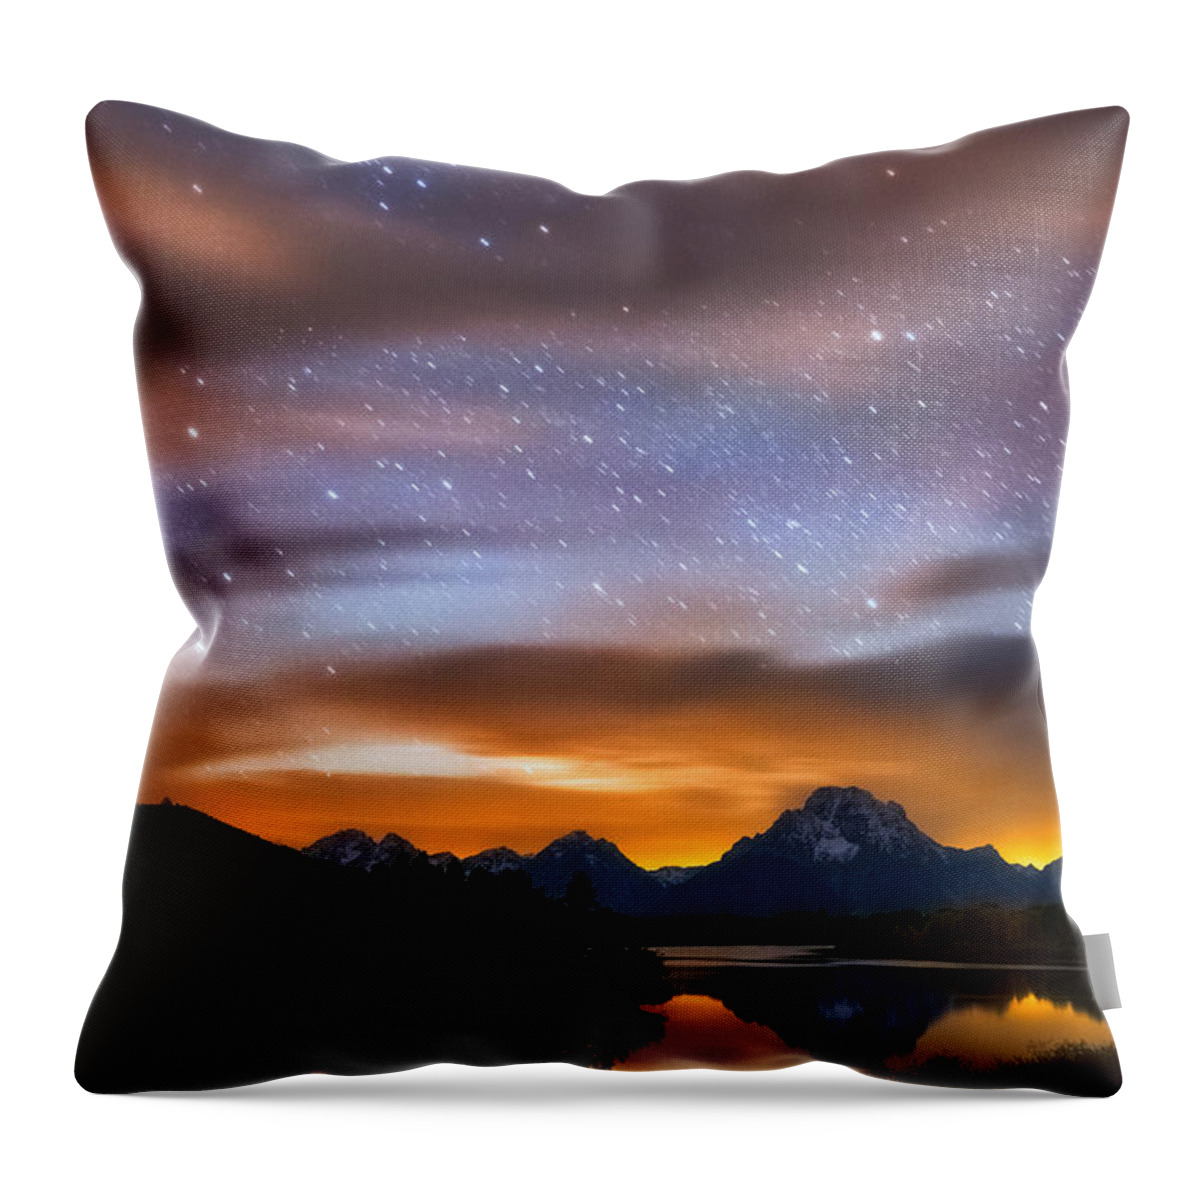 Starry Nights Throw Pillow featuring the photograph Oxbow Dreams by Darren White